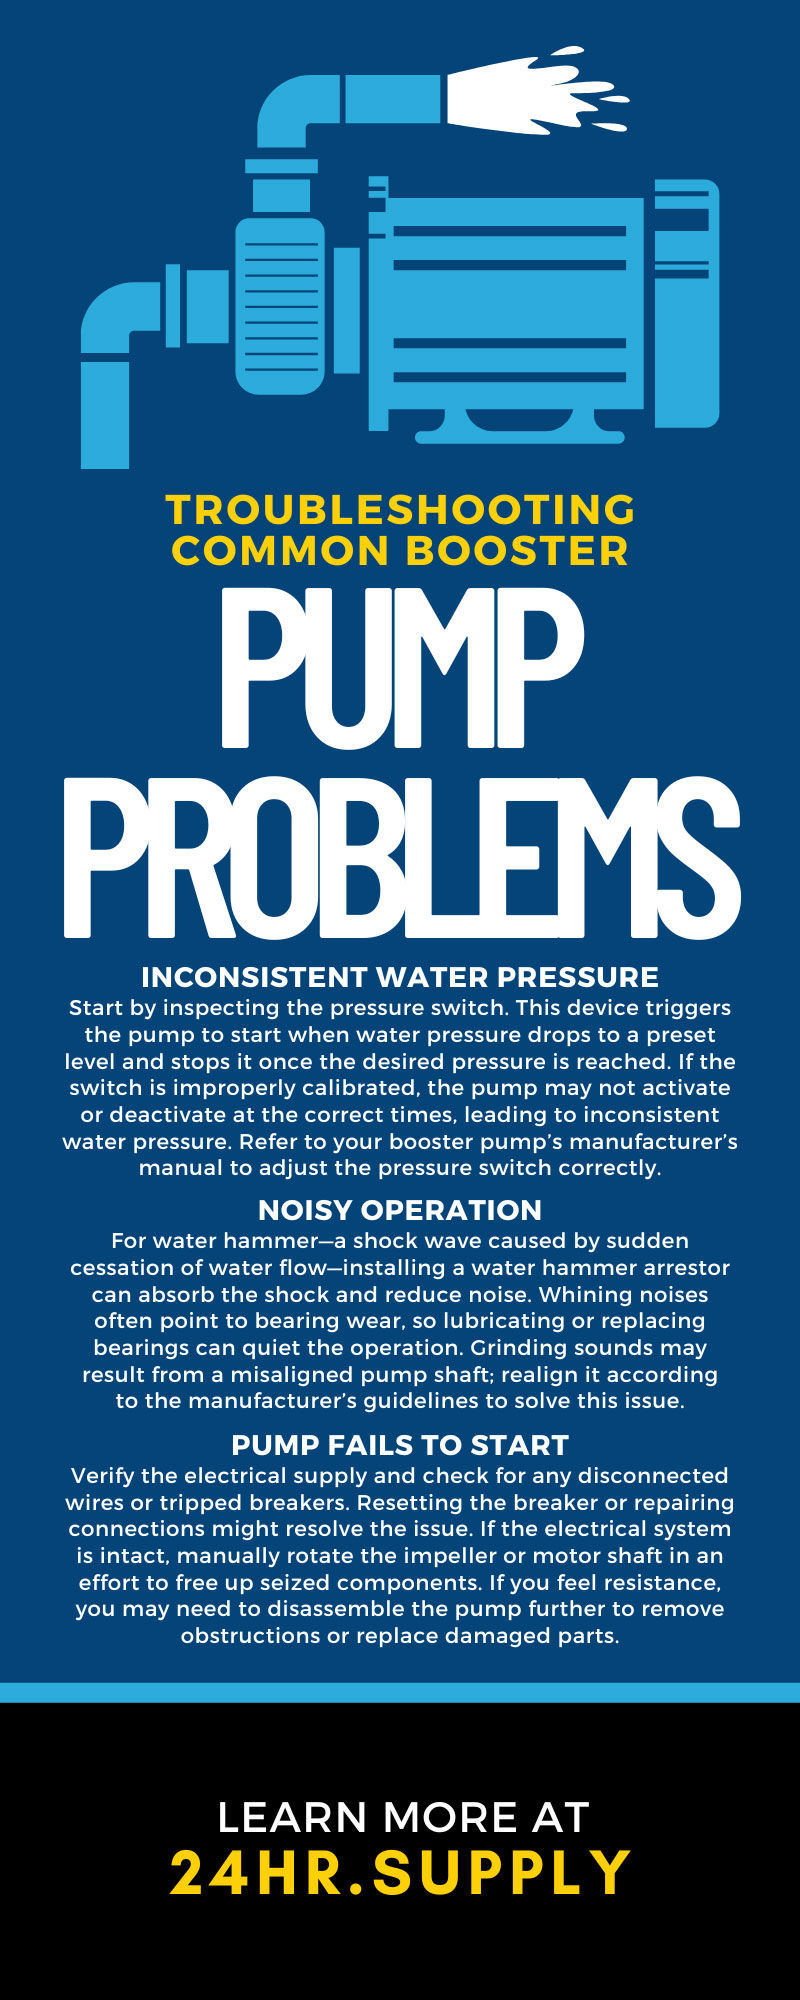 Troubleshooting 8 Common Booster Pump Problems